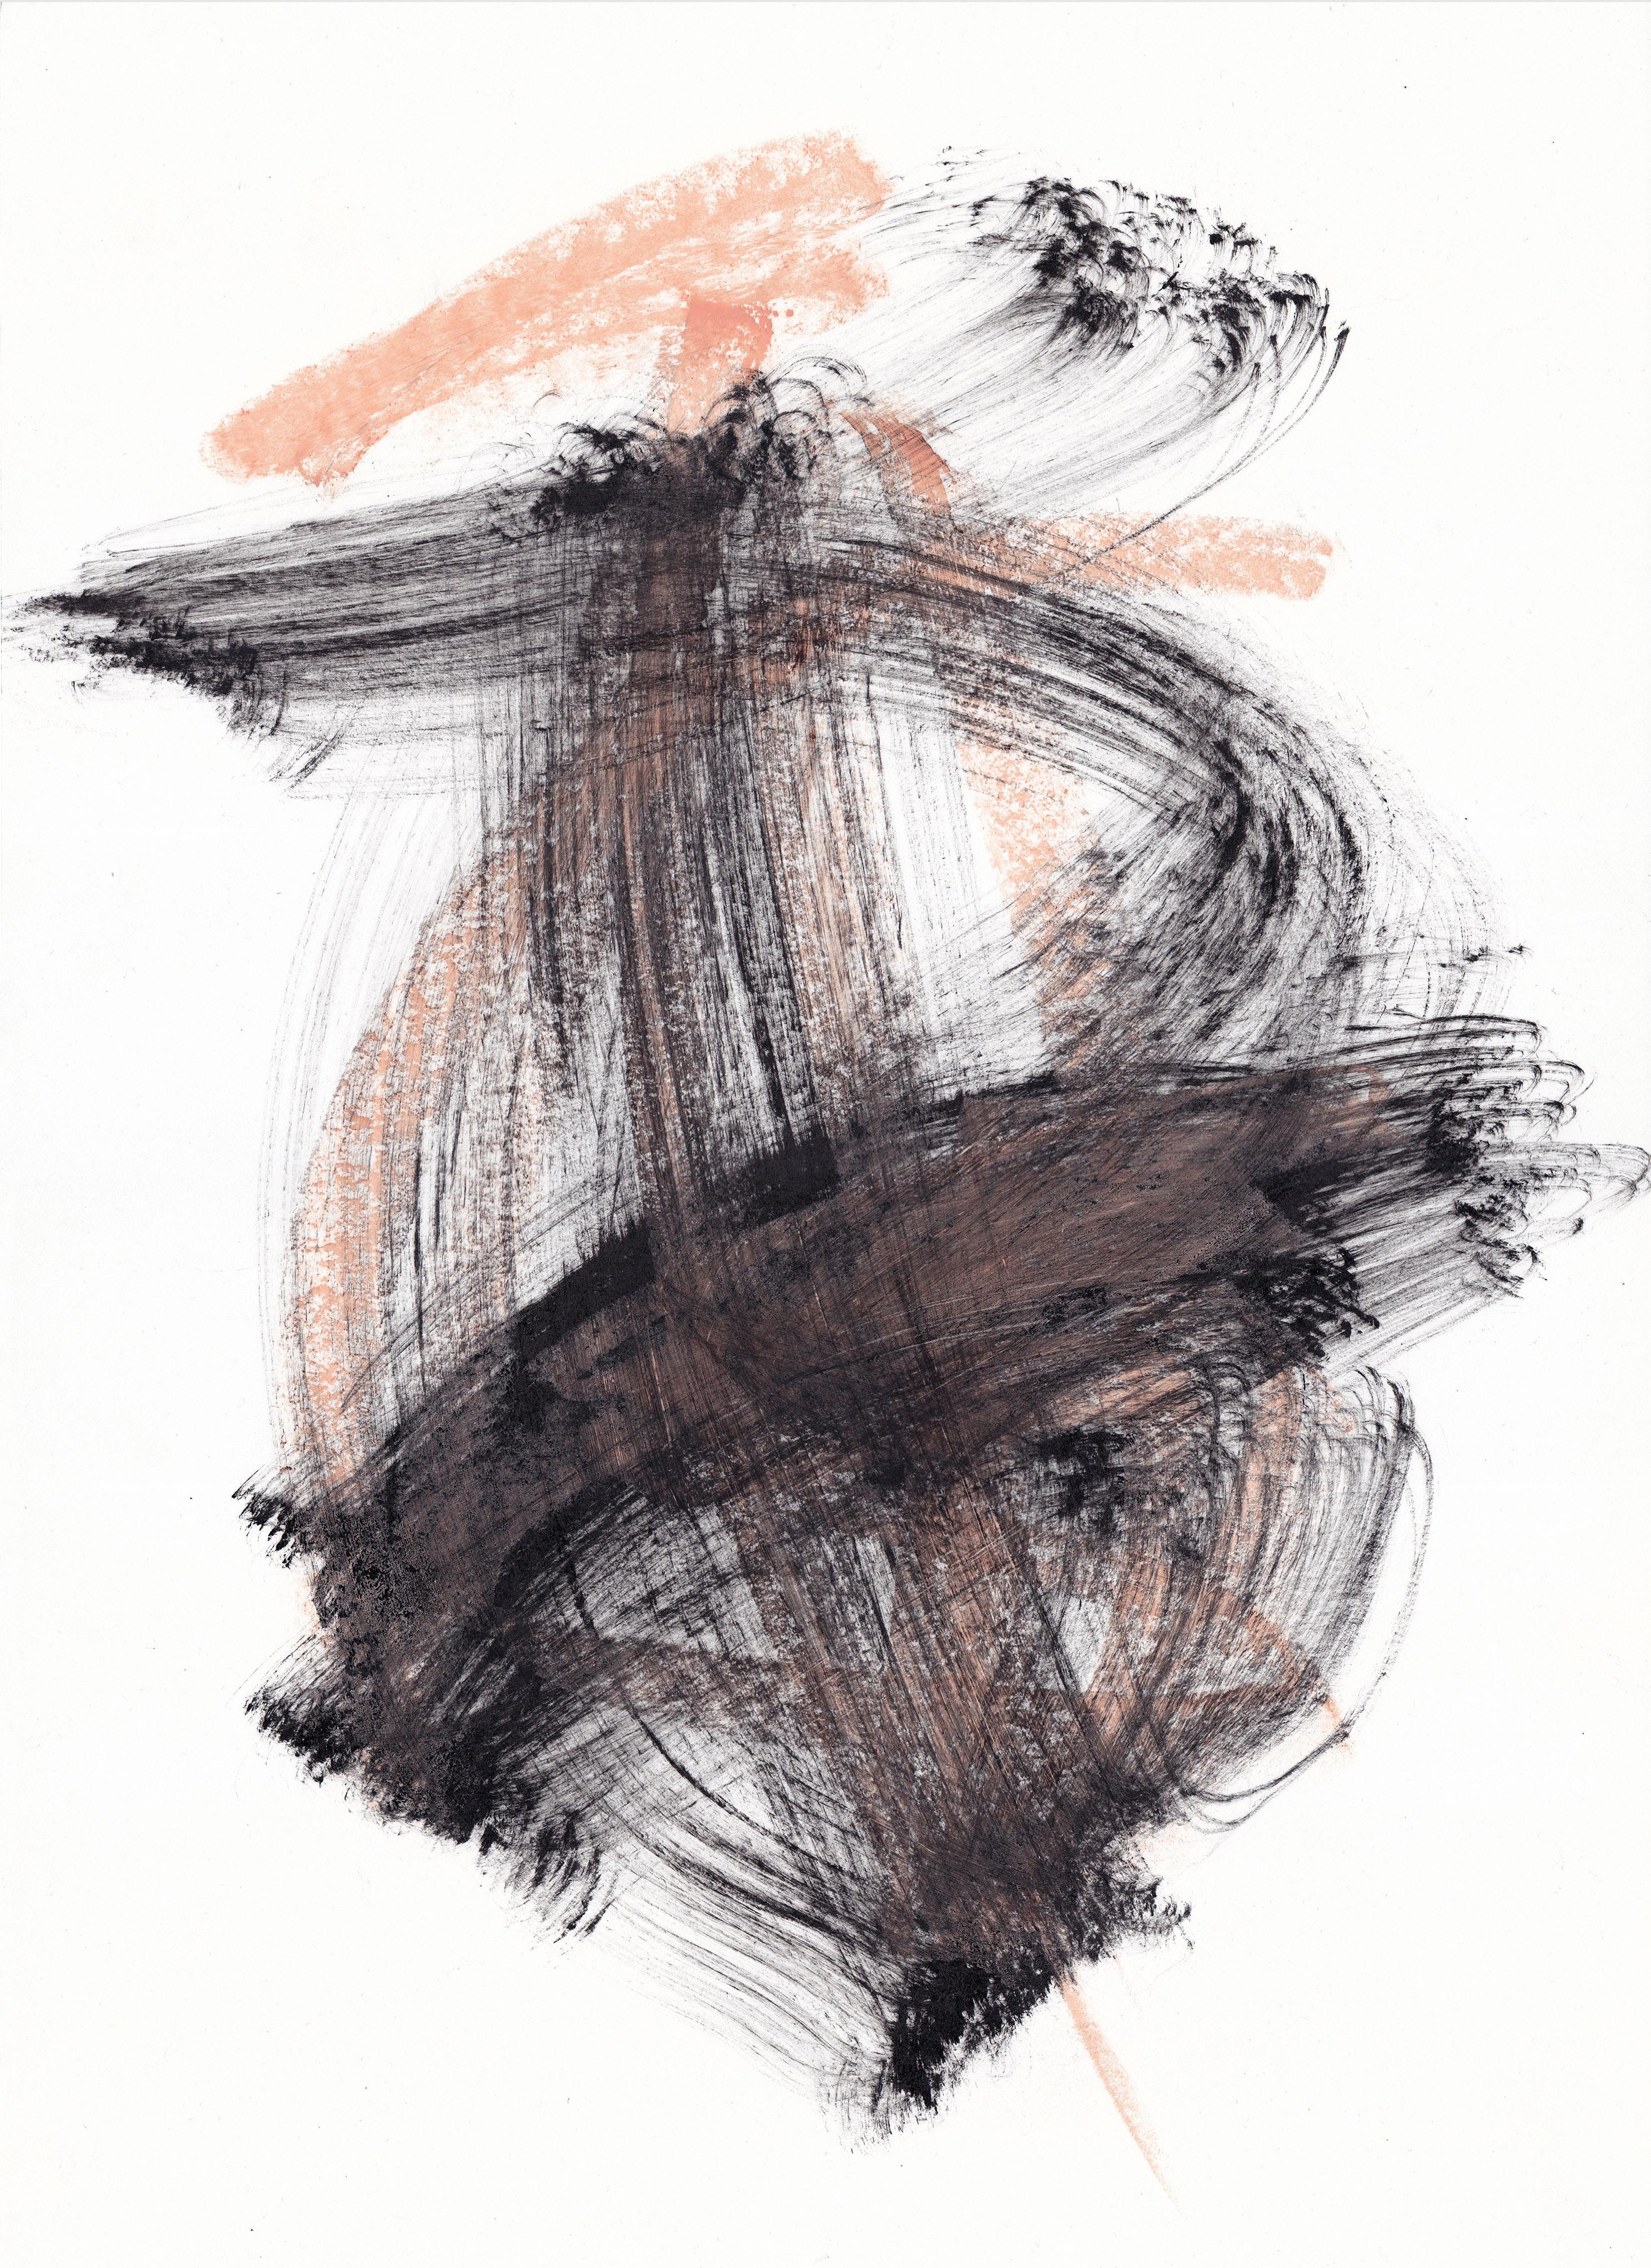 Abstract Drawing Sve Gri - Calligraphie abstraite expressive. Zen Artwork. Caractère